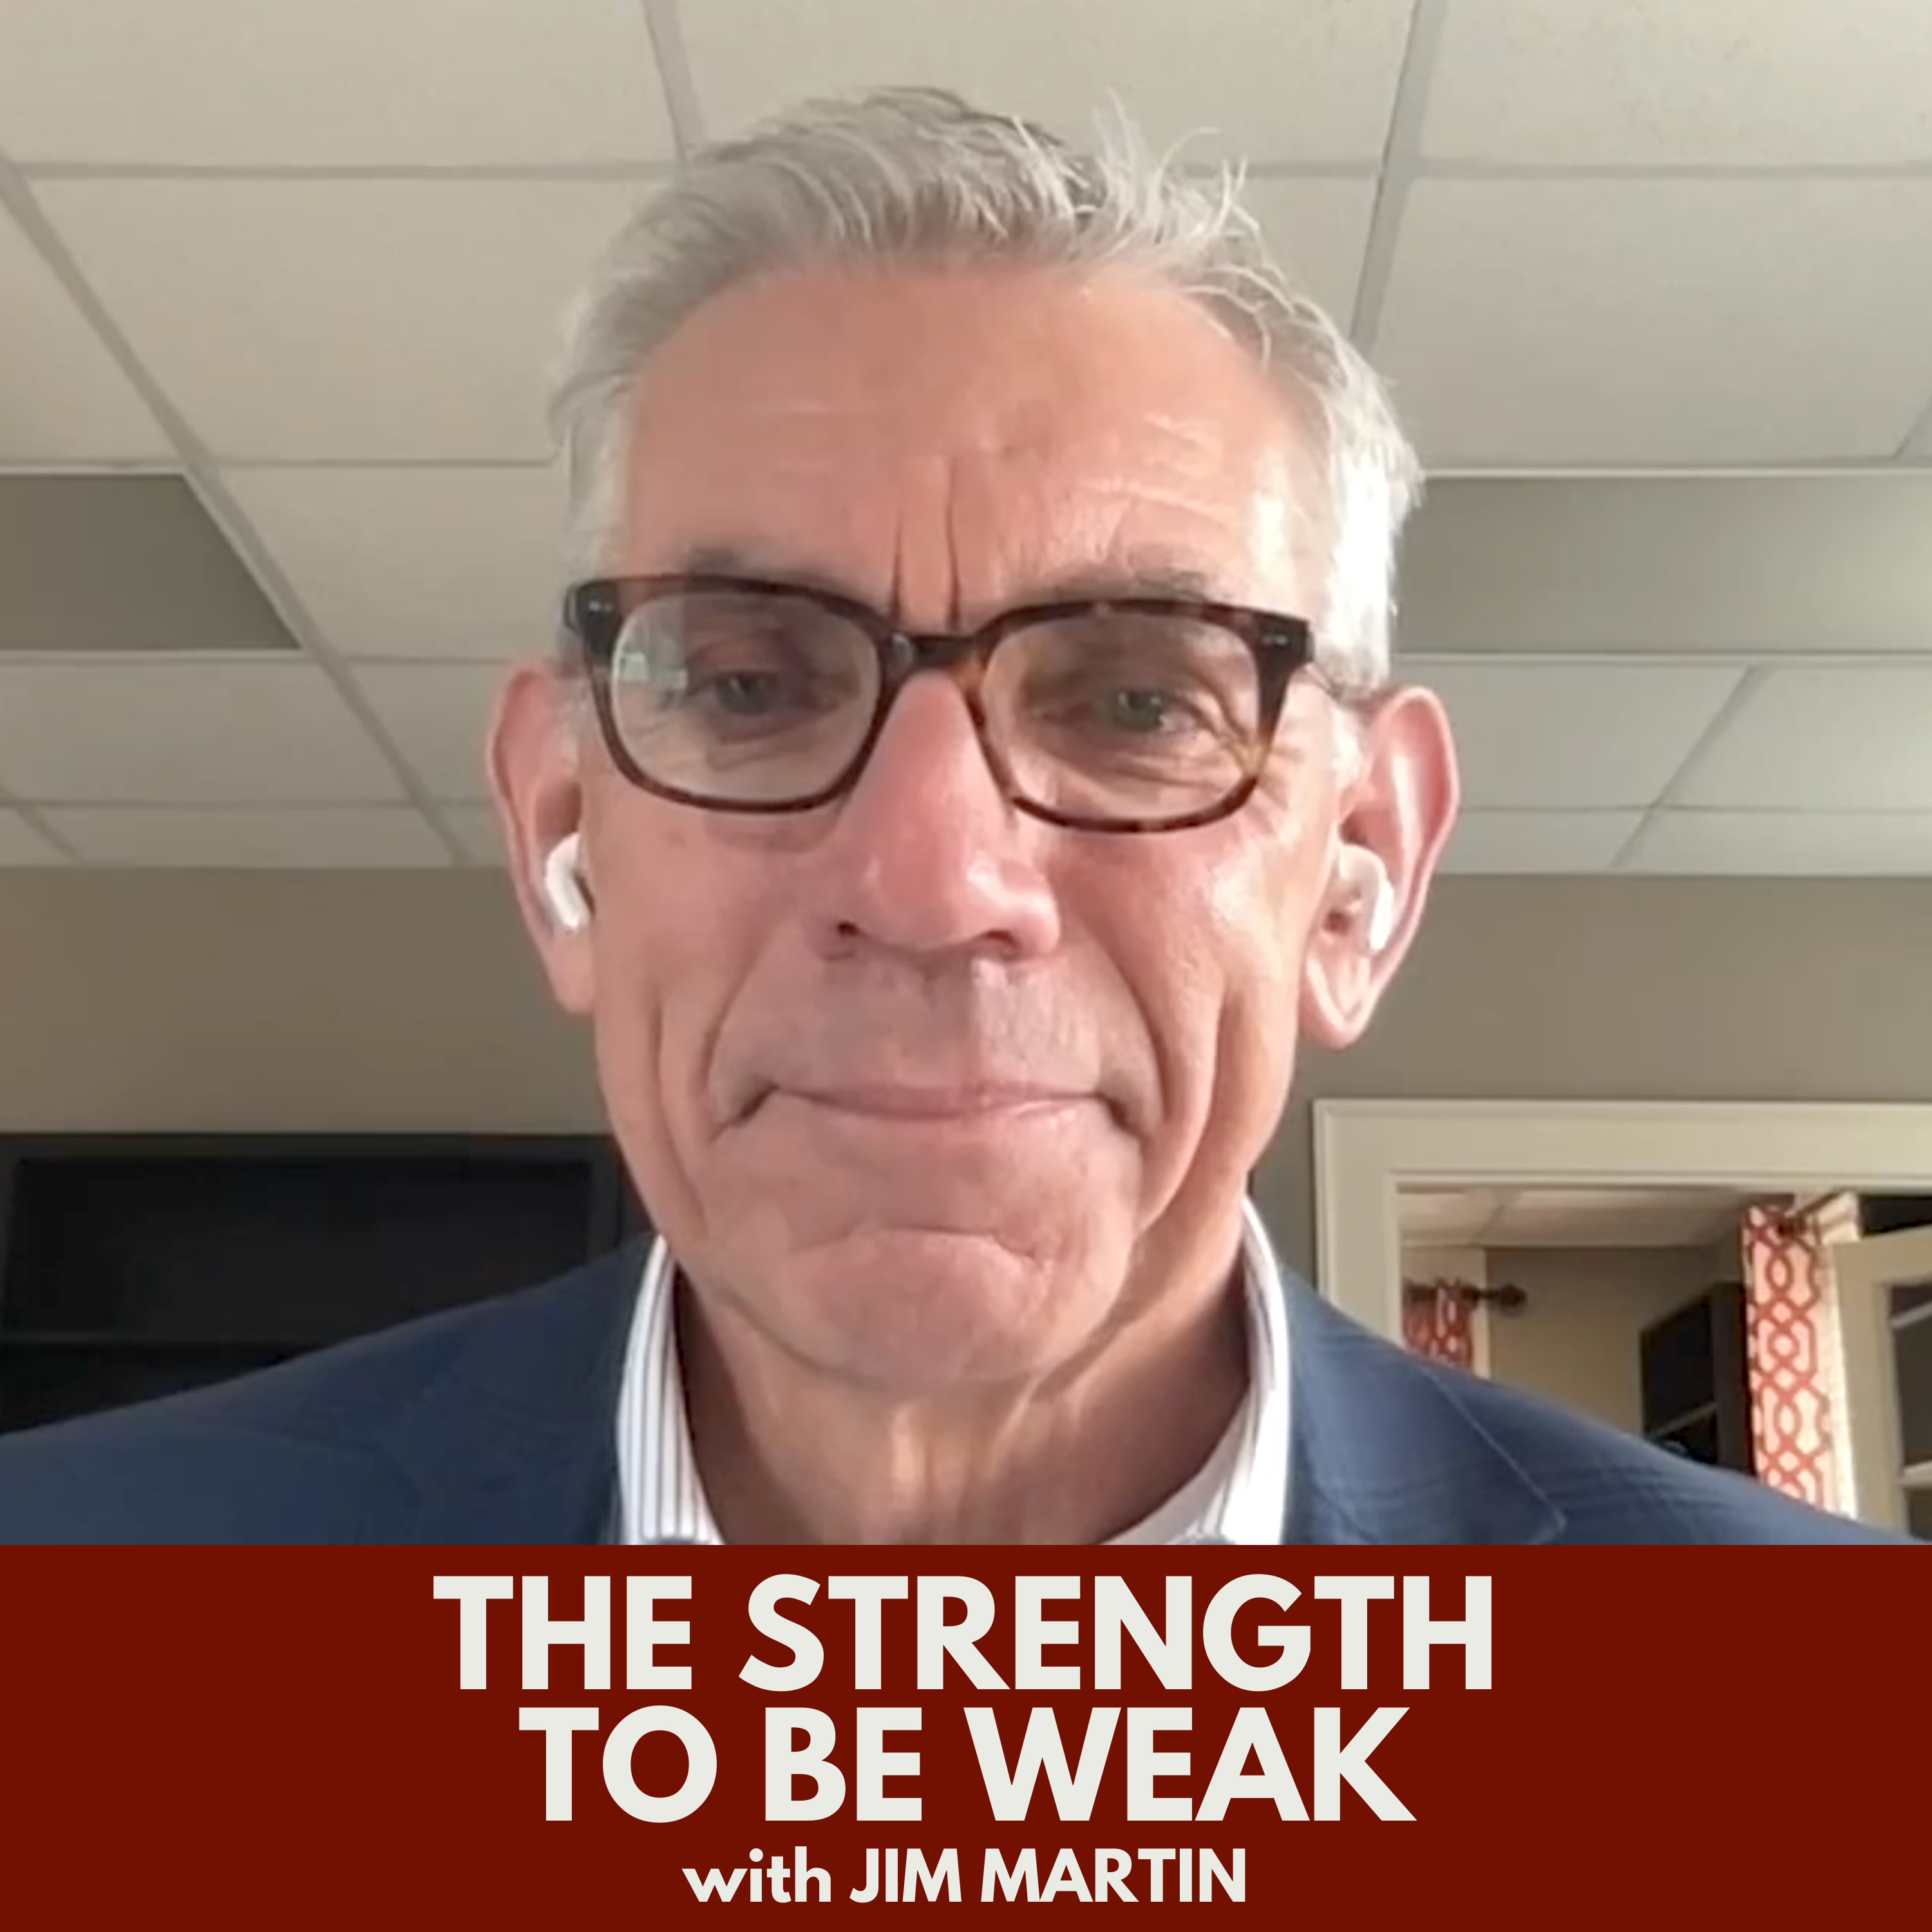 The Strength to Be Weak with Jim Martin